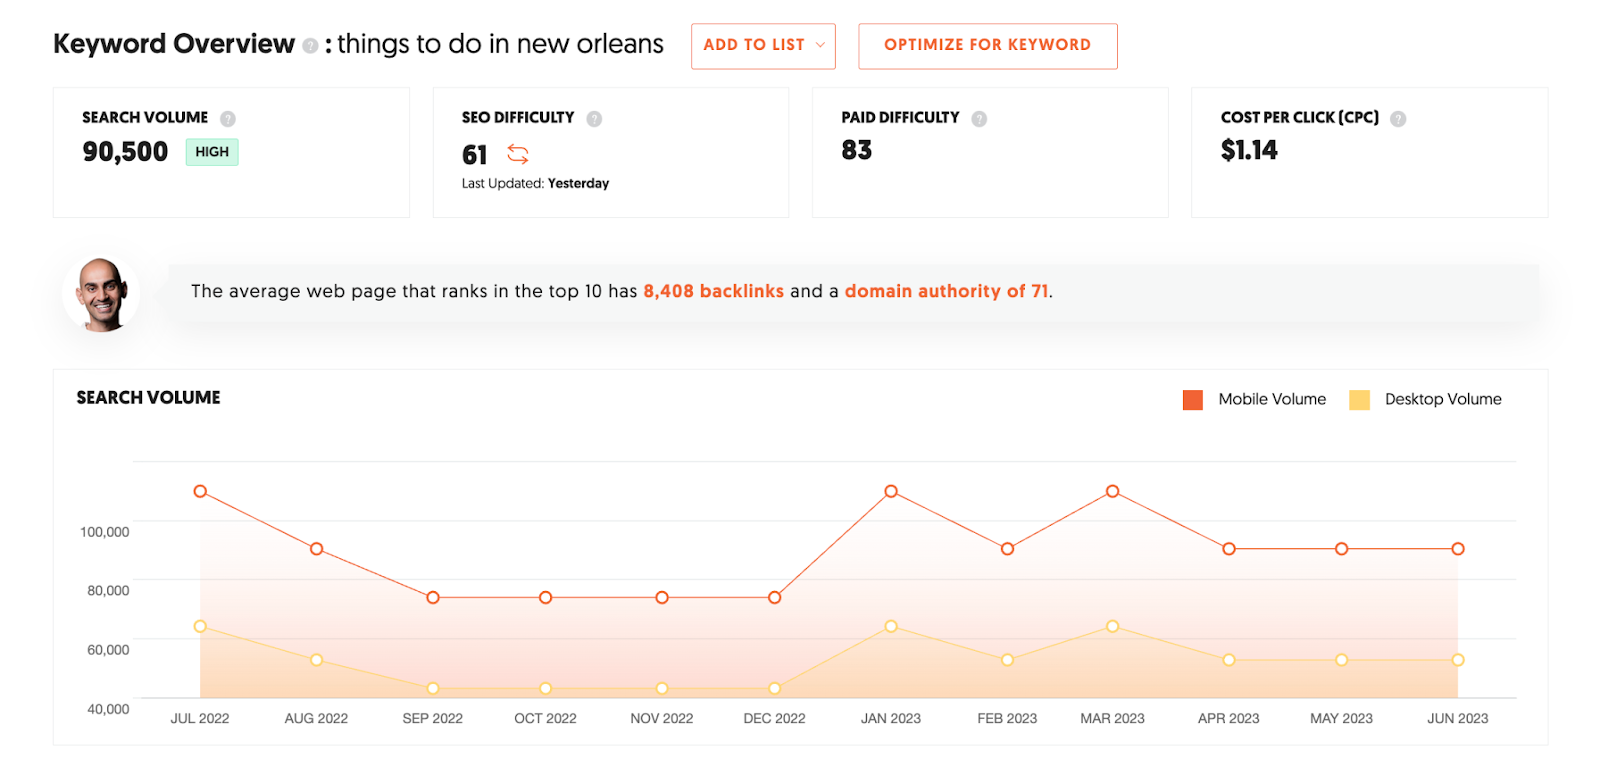 A screenshot of the search volume, SEO difficulty, paid difficulty, and cost per click for the keyword “things to do in New Orleans” on Ubersuggest.